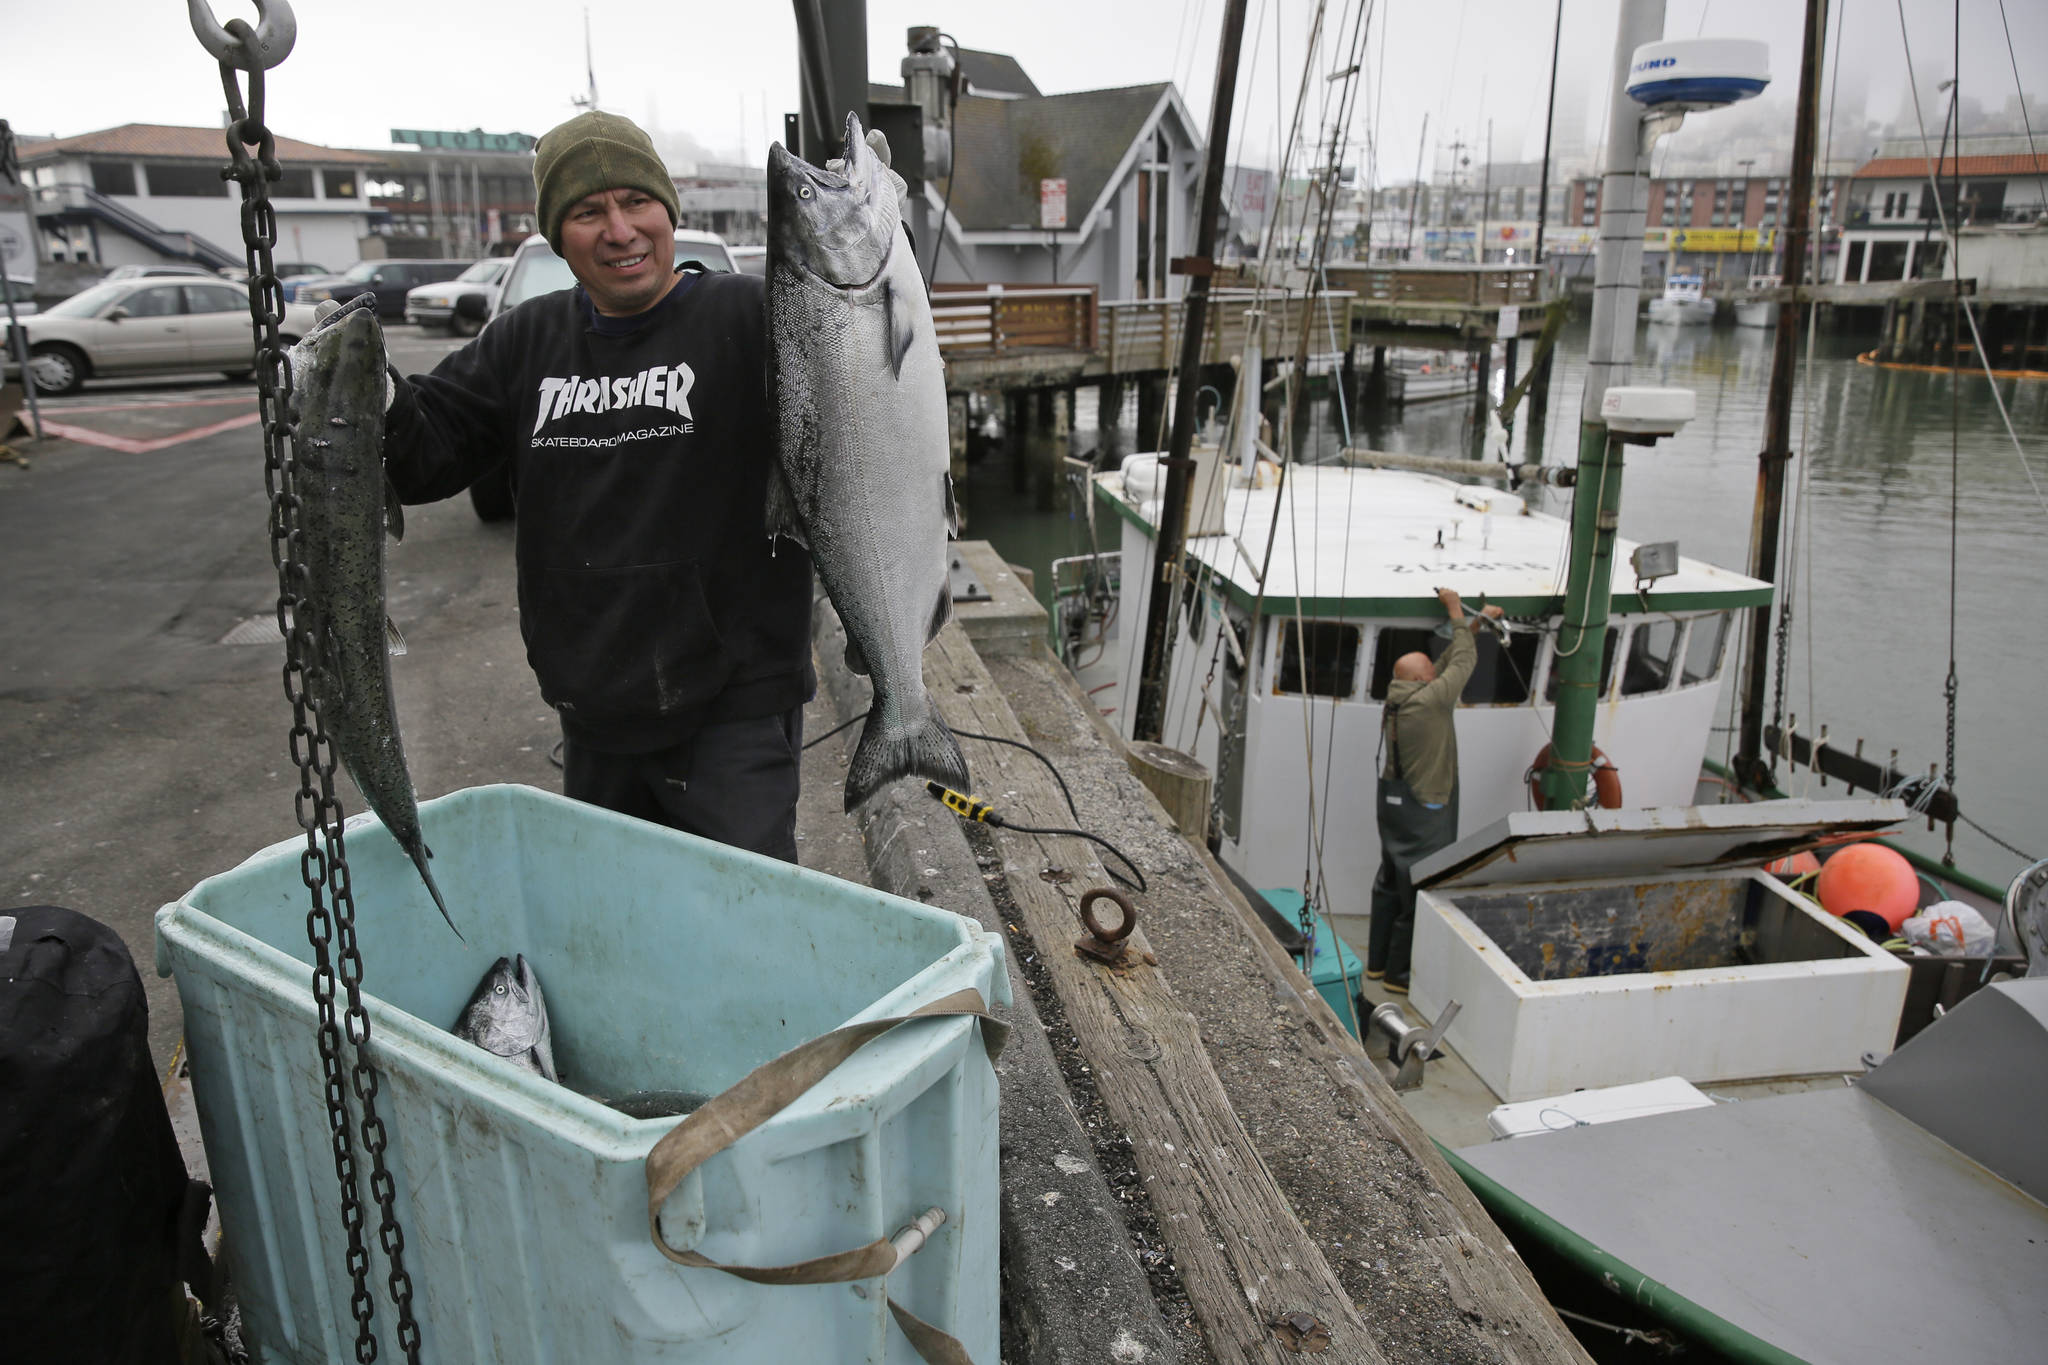 In this photo taken Monday, July 22, 2019, Ivan Montoya, left, of Flannery Seafood, holds up chinook salmon after it was brought in by Ron Kemp, right, at Fisherman’s Wharf in San Francisco. California fishermen are reporting one of the best salmon fishing seasons in more than a decade, thanks to heavy rain and snow that ended the state’s historic drought. It’s a sharp reversal for chinook salmon, also known as king salmon, an iconic fish that helps sustain many Pacific Coast fishing communities.(AP Photo/Eric Risberg)